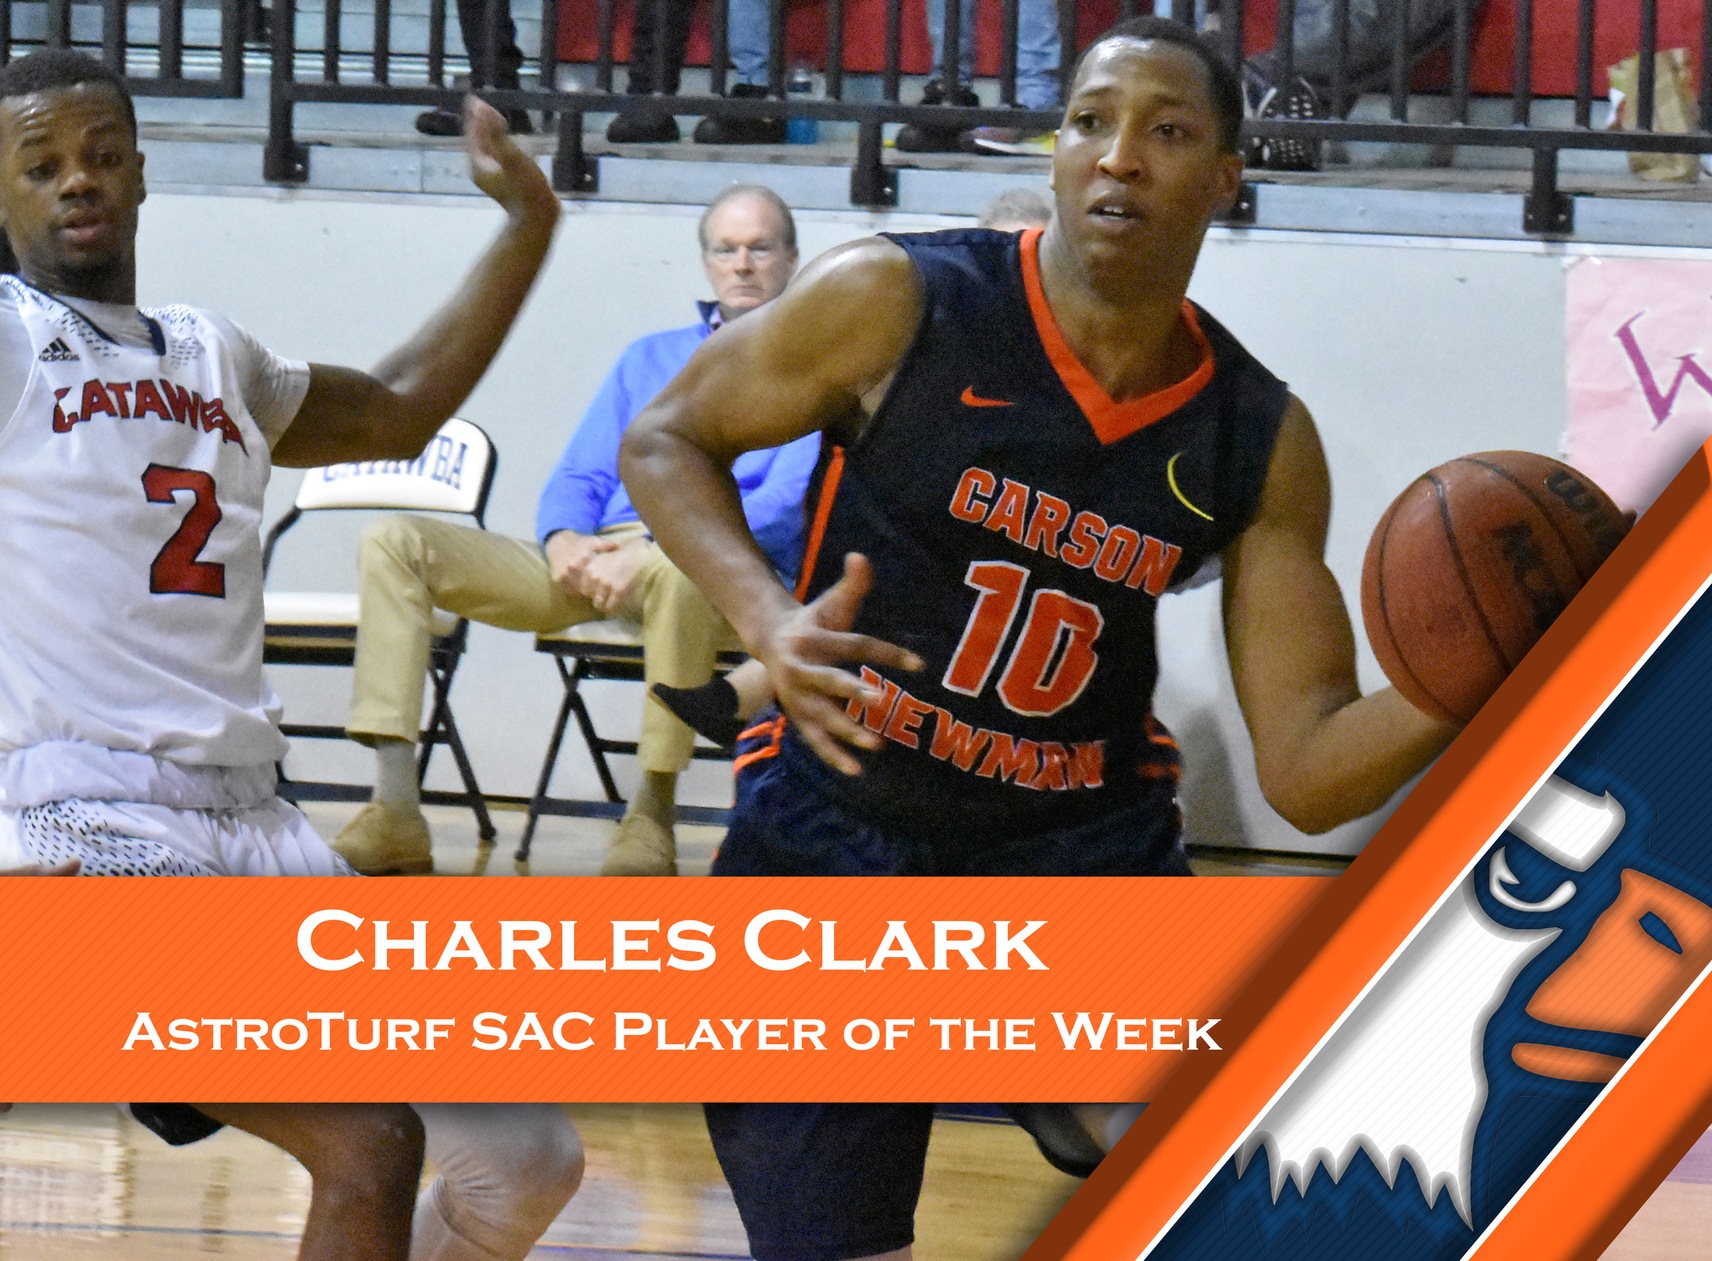 Another one, Clark picks up AstroTurf SAC Player of the Week honors again